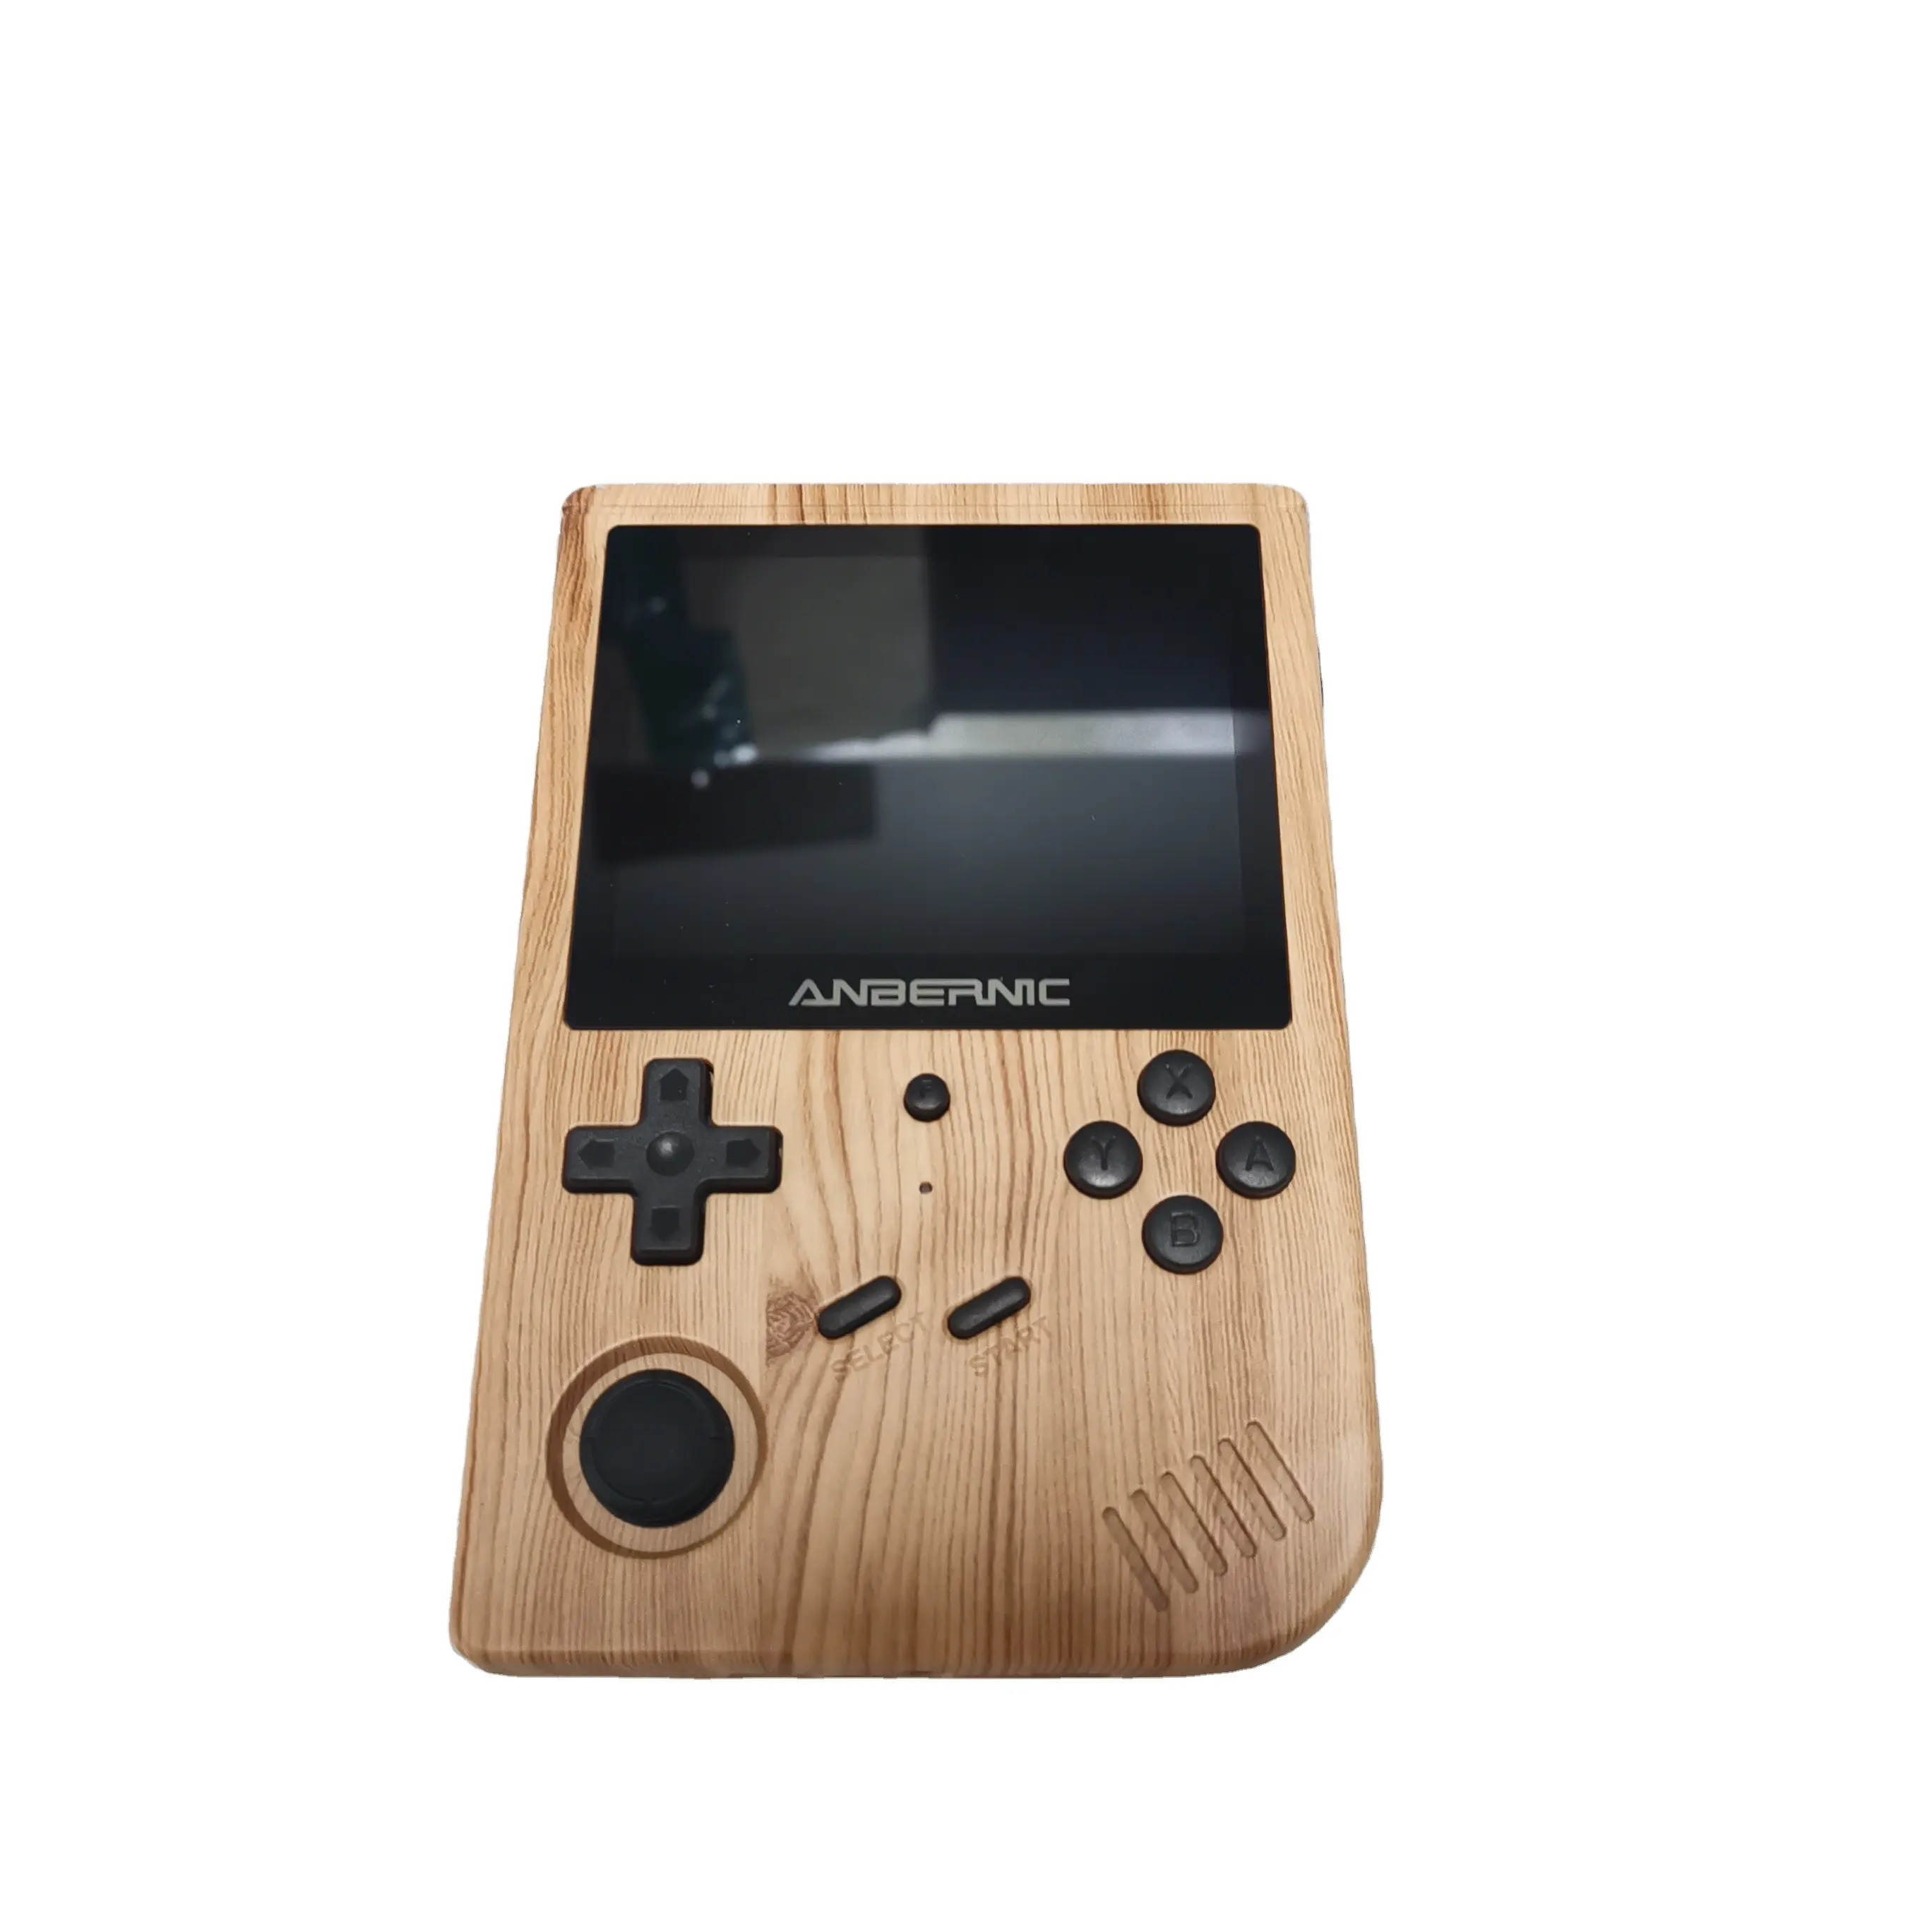 ANBERNIC New RG351V Retro Games Built-in 16G 64G RK3326 Open Source 3.5 INCH 640*480 handheld game console